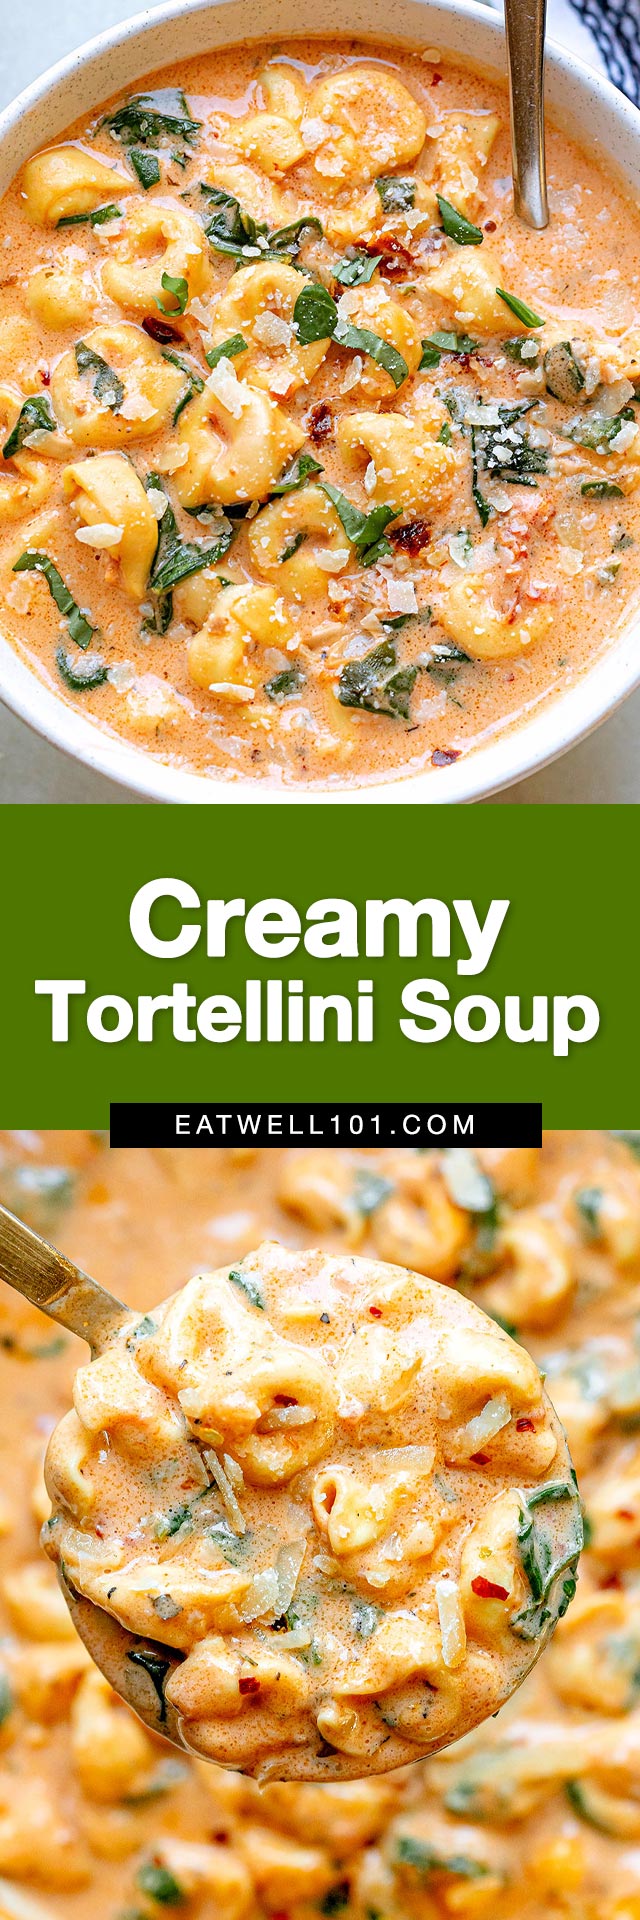 Creamy tortellini soup - #tortellini #soup #recipe #eatwell101 - Perfect for cold nights. Need a cozy dinner in less than 30 minute, try our tortellini soup recipe!